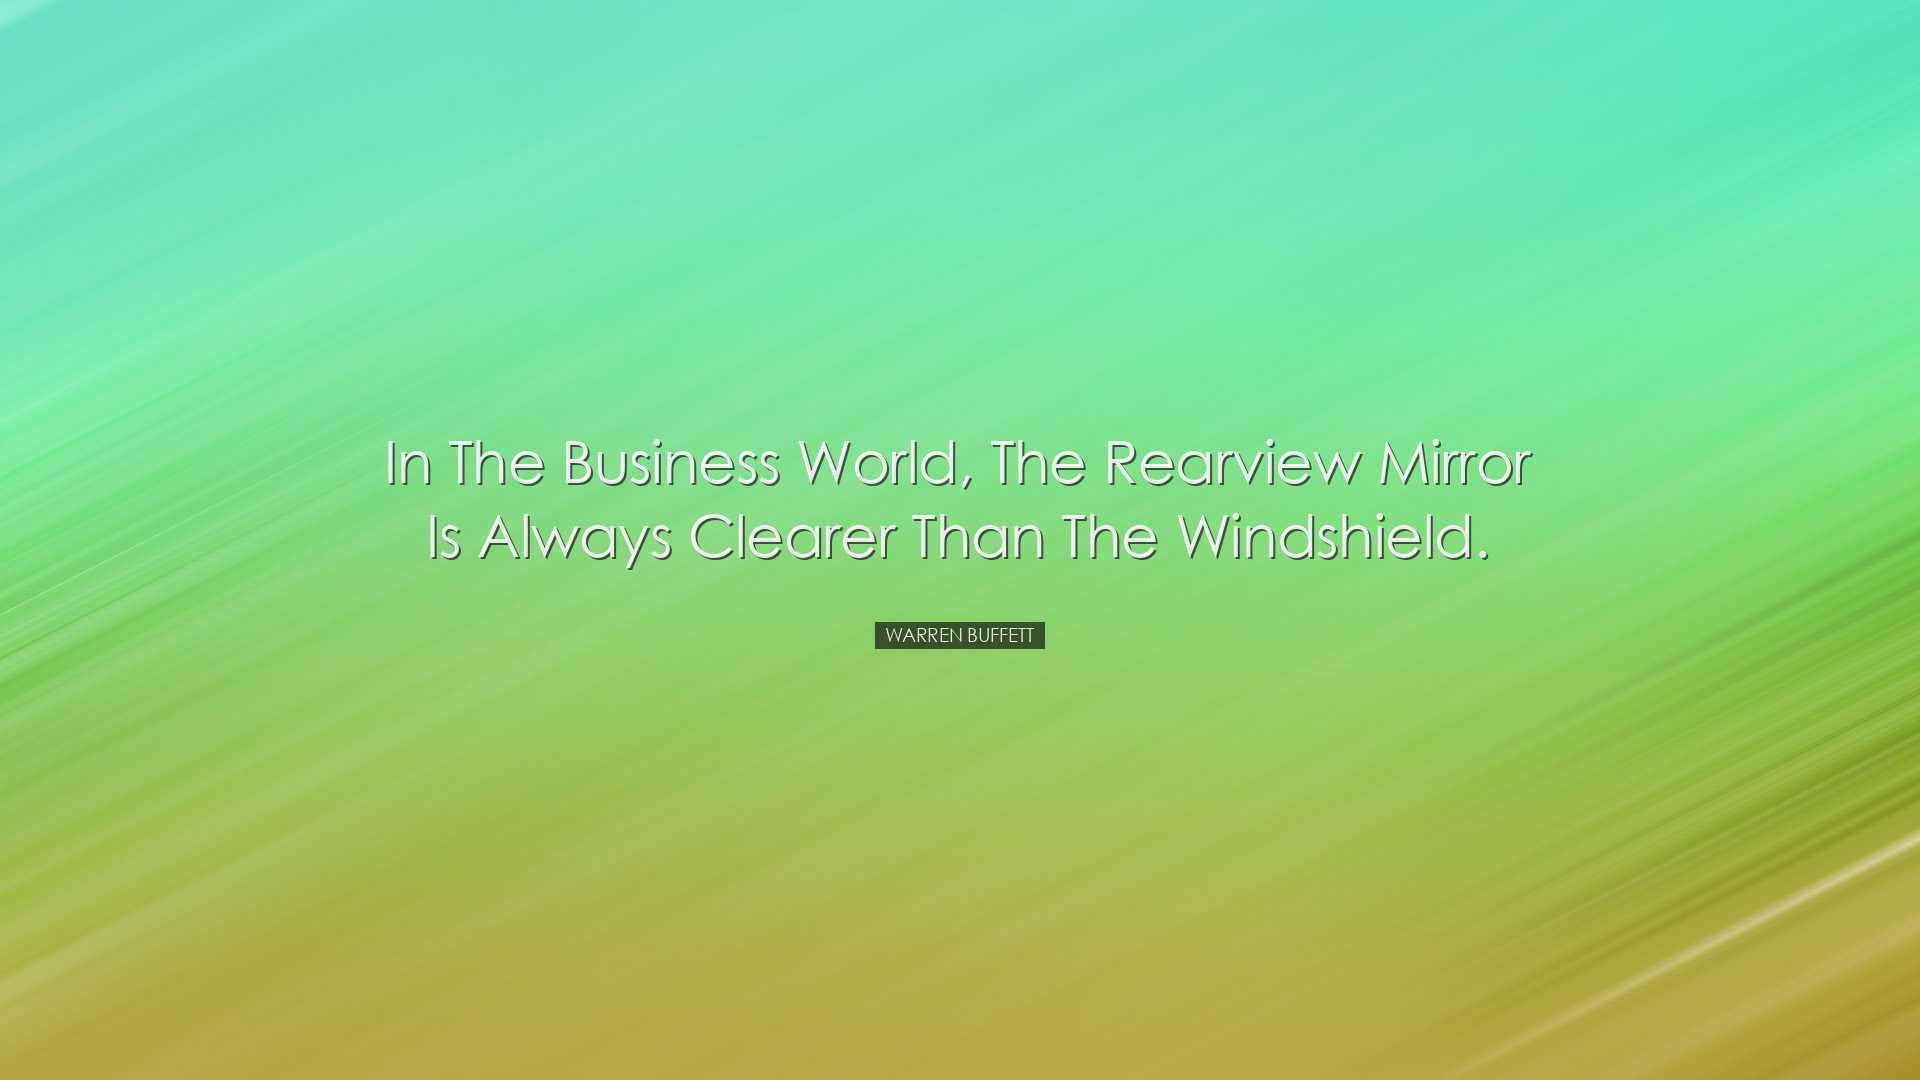 In the business world, the rearview mirror is always clearer than